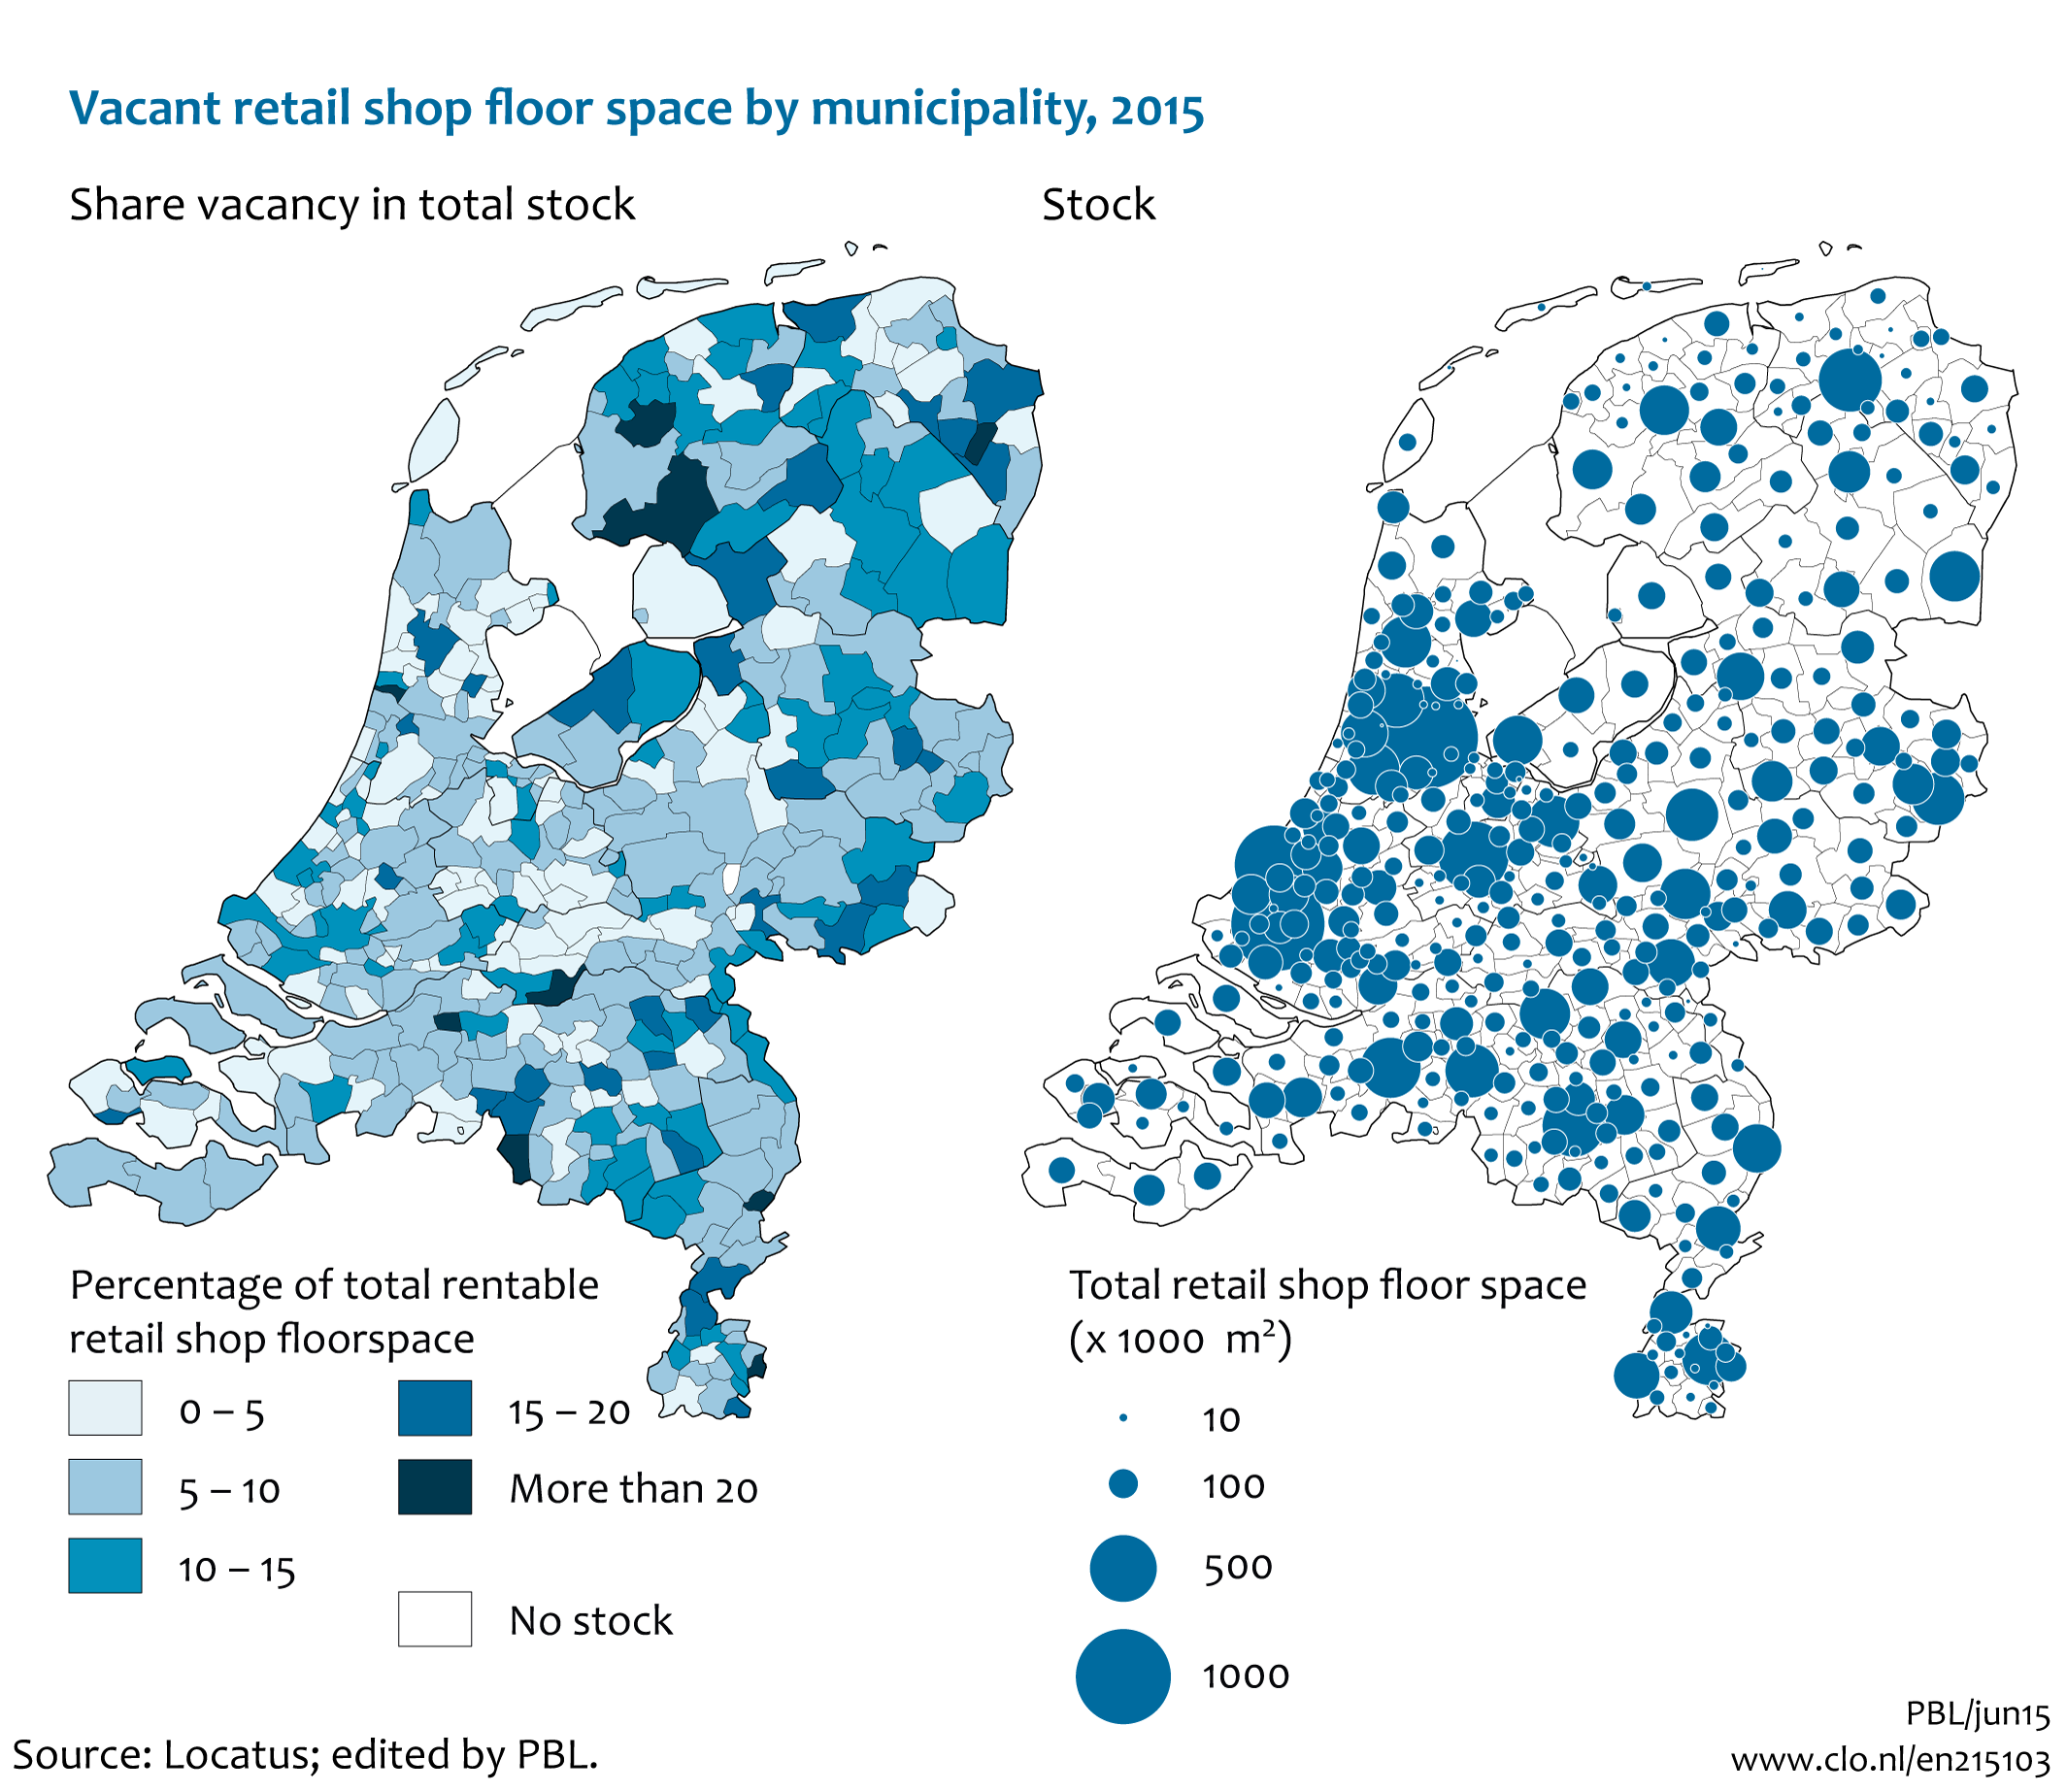 Image Vacant shop floor area by municipality, 2015. The image is further explained in the text.